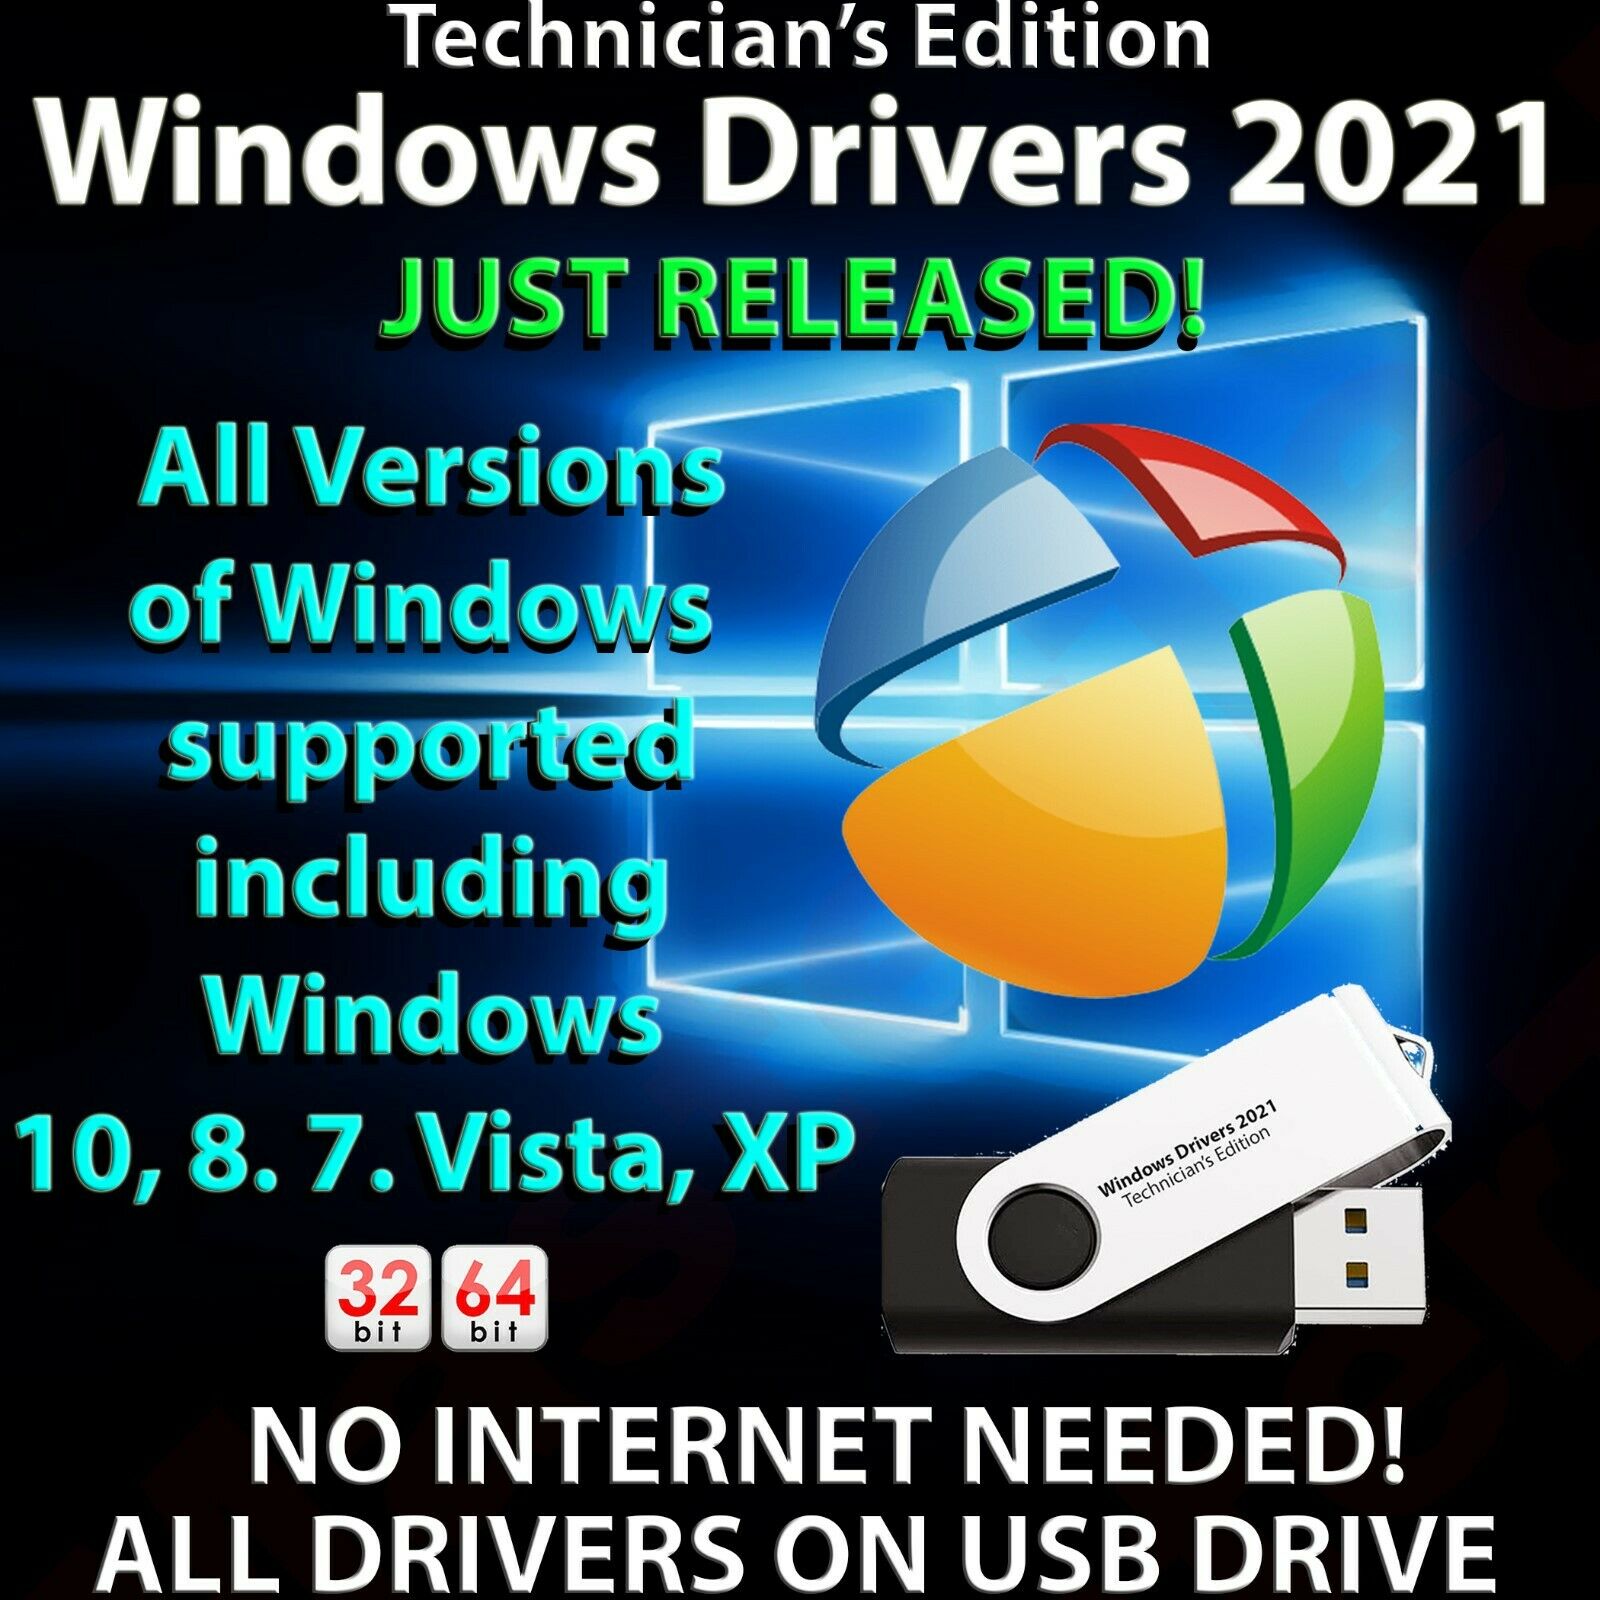 Windows Drivers 2021 Technician's Edition for ALL versions of Windows USB drive